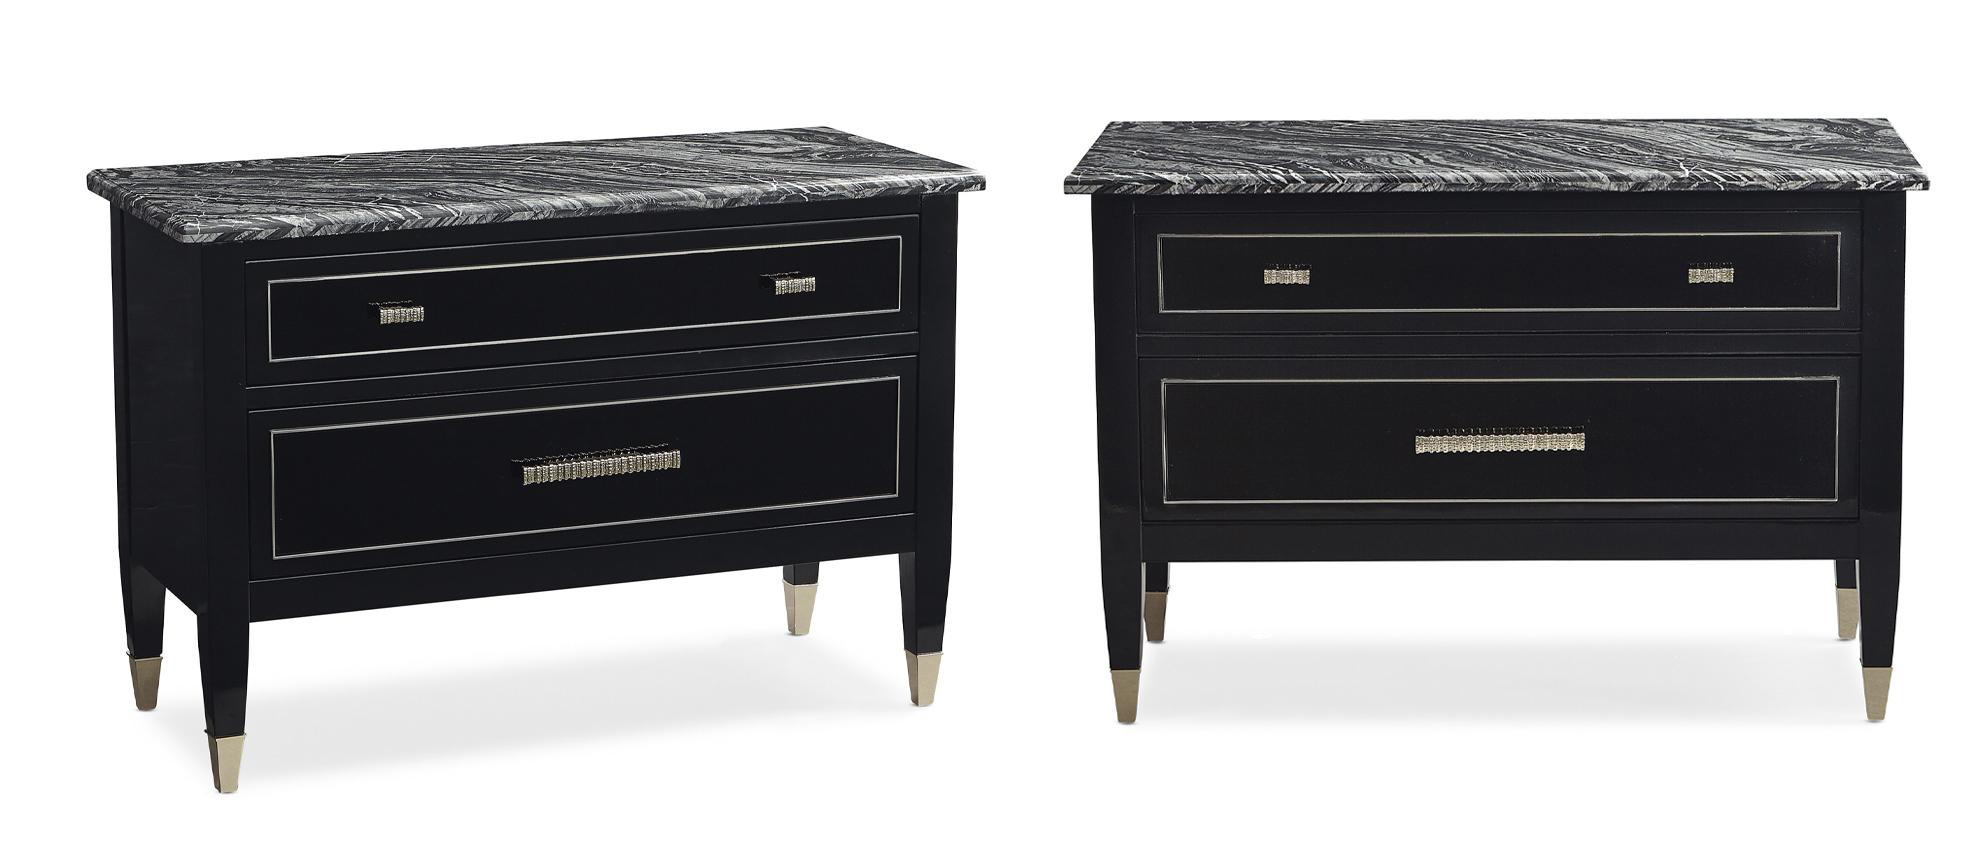 

    
Piano Black W/ Stone Top EN VOGUE NIGHTSTAND Set 2 Pcs by Caracole
